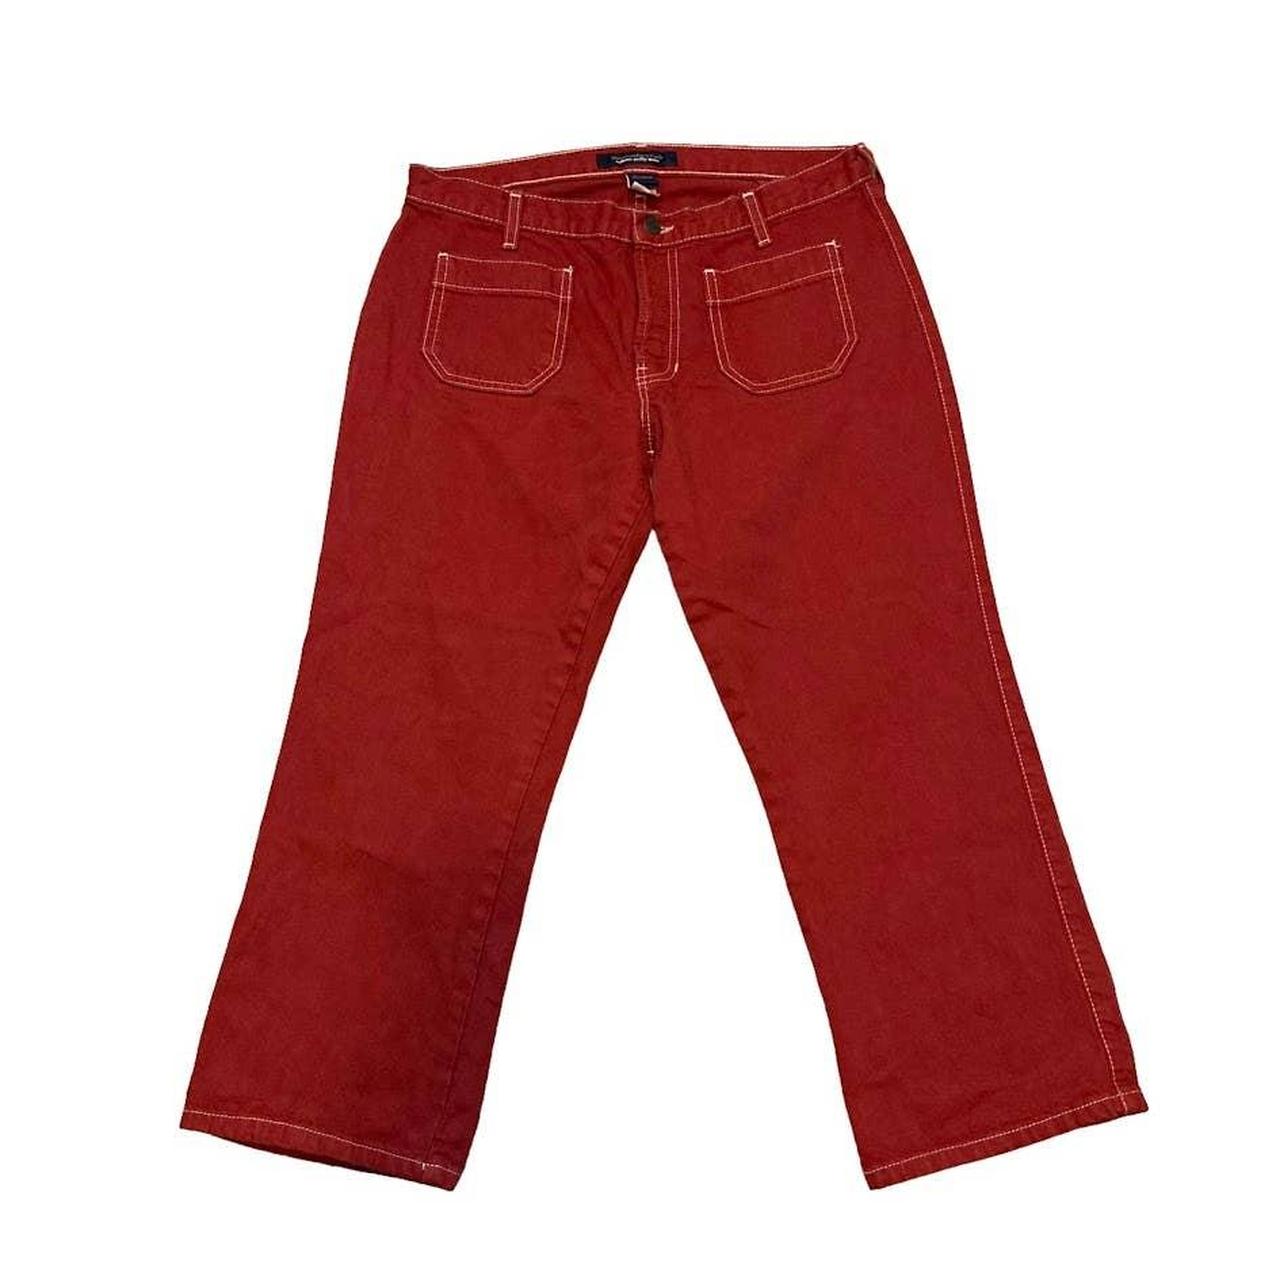 Abercrombie & Fitch Women's Red and White Trousers